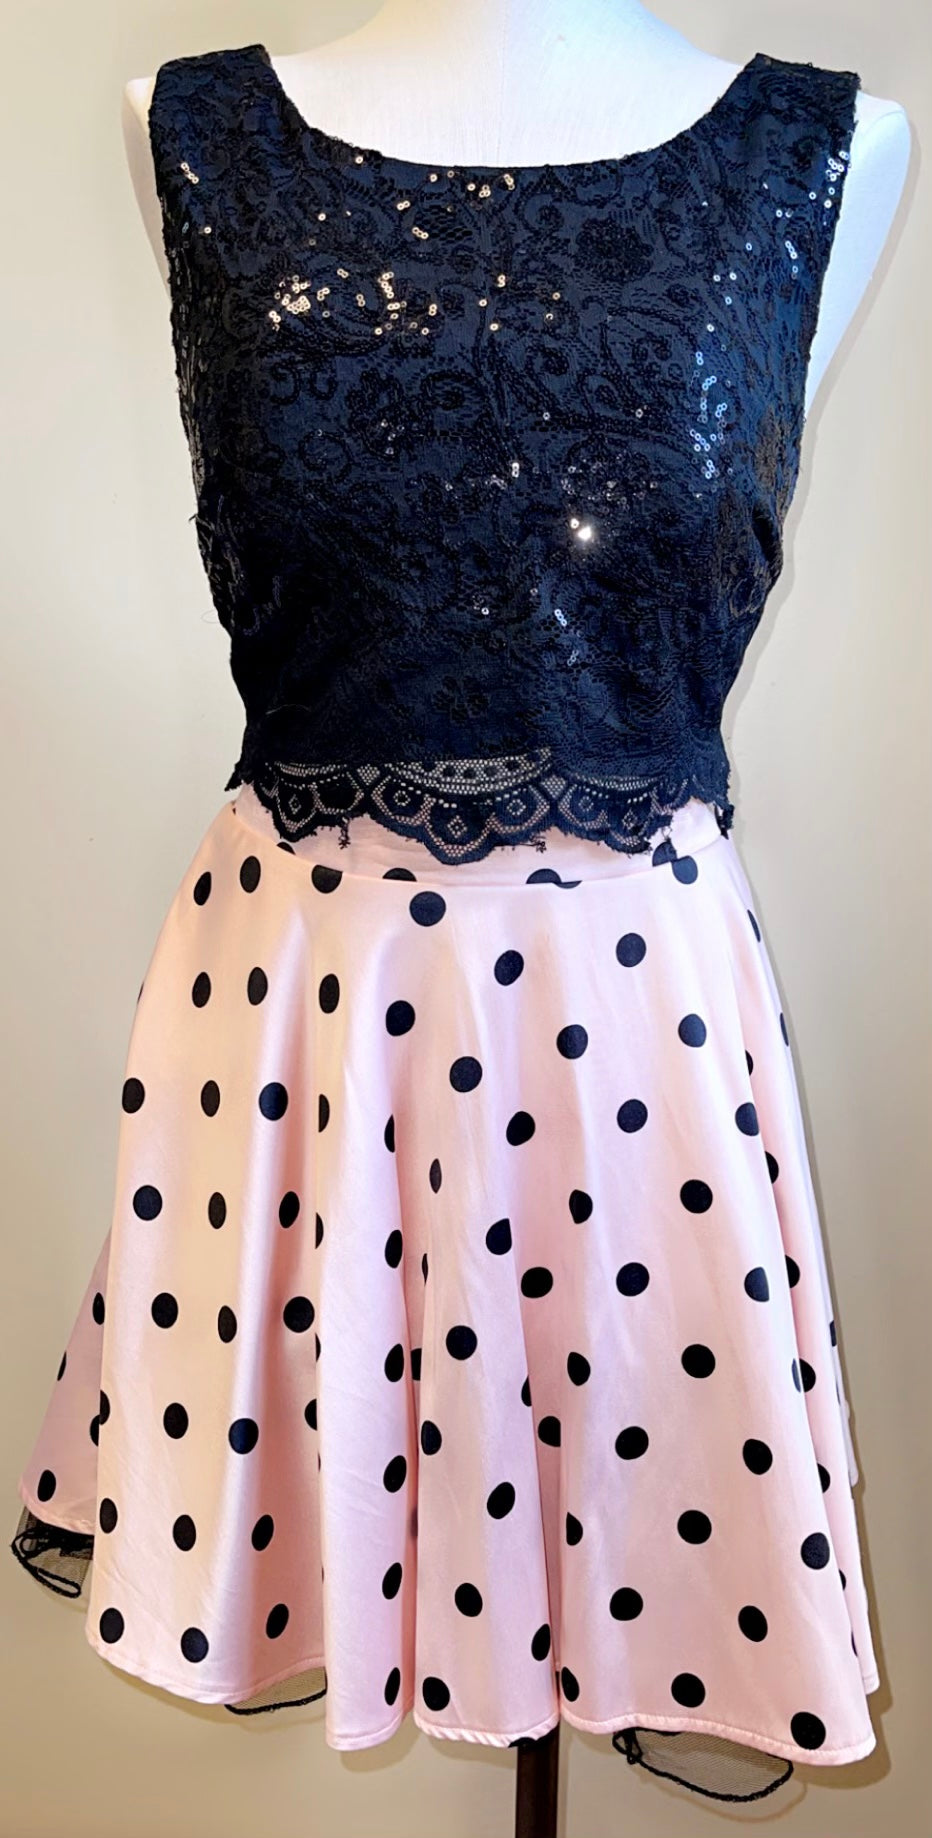 WACH100-G  Black Sequin and Pink Polka Dot 2pc Dress, Size 16/18